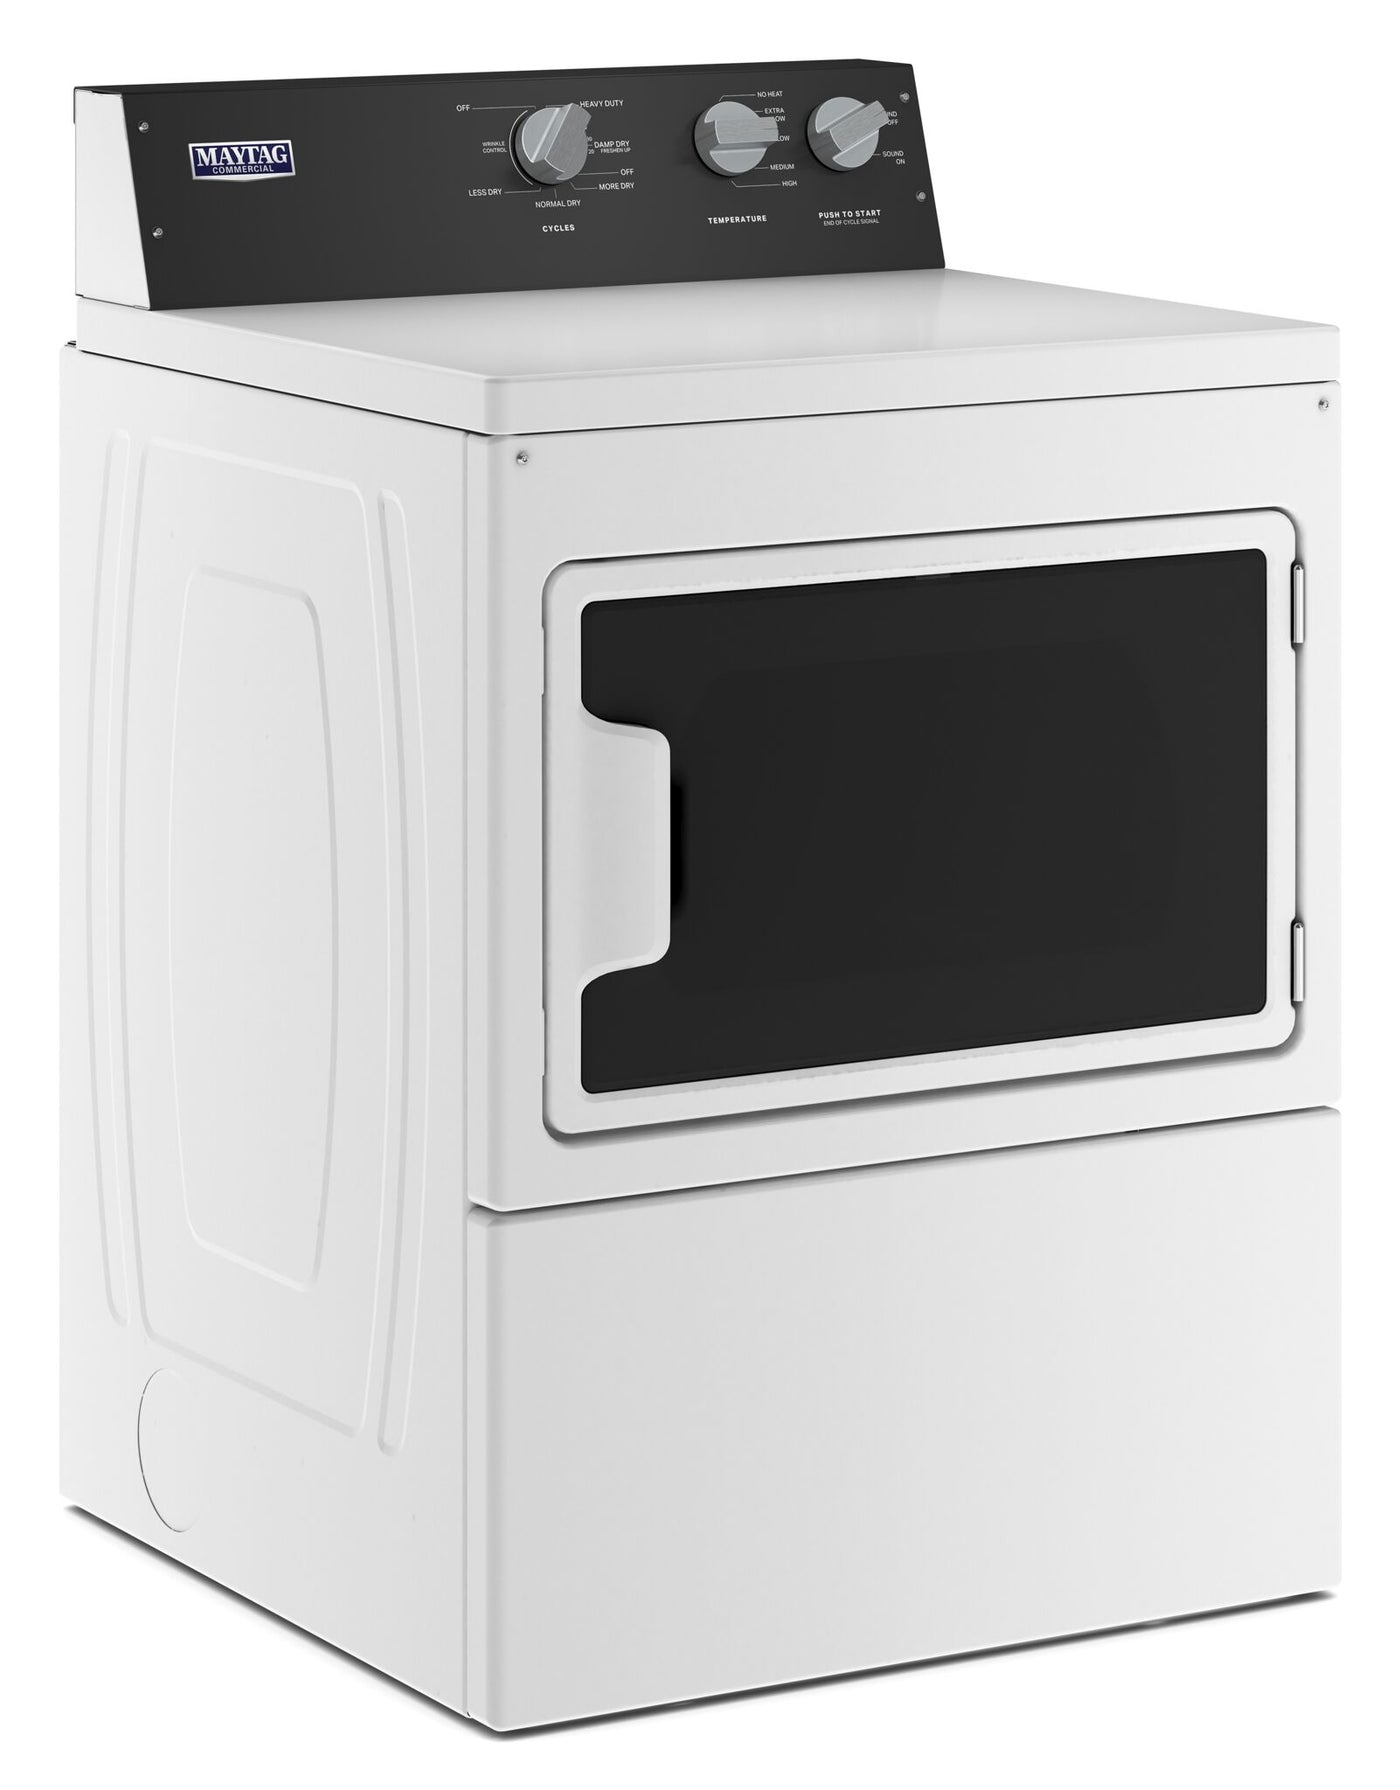 Maytag White Gas Commercial-Grade Residential Dryer (7.40 Cu Ft) - MGDP586KW